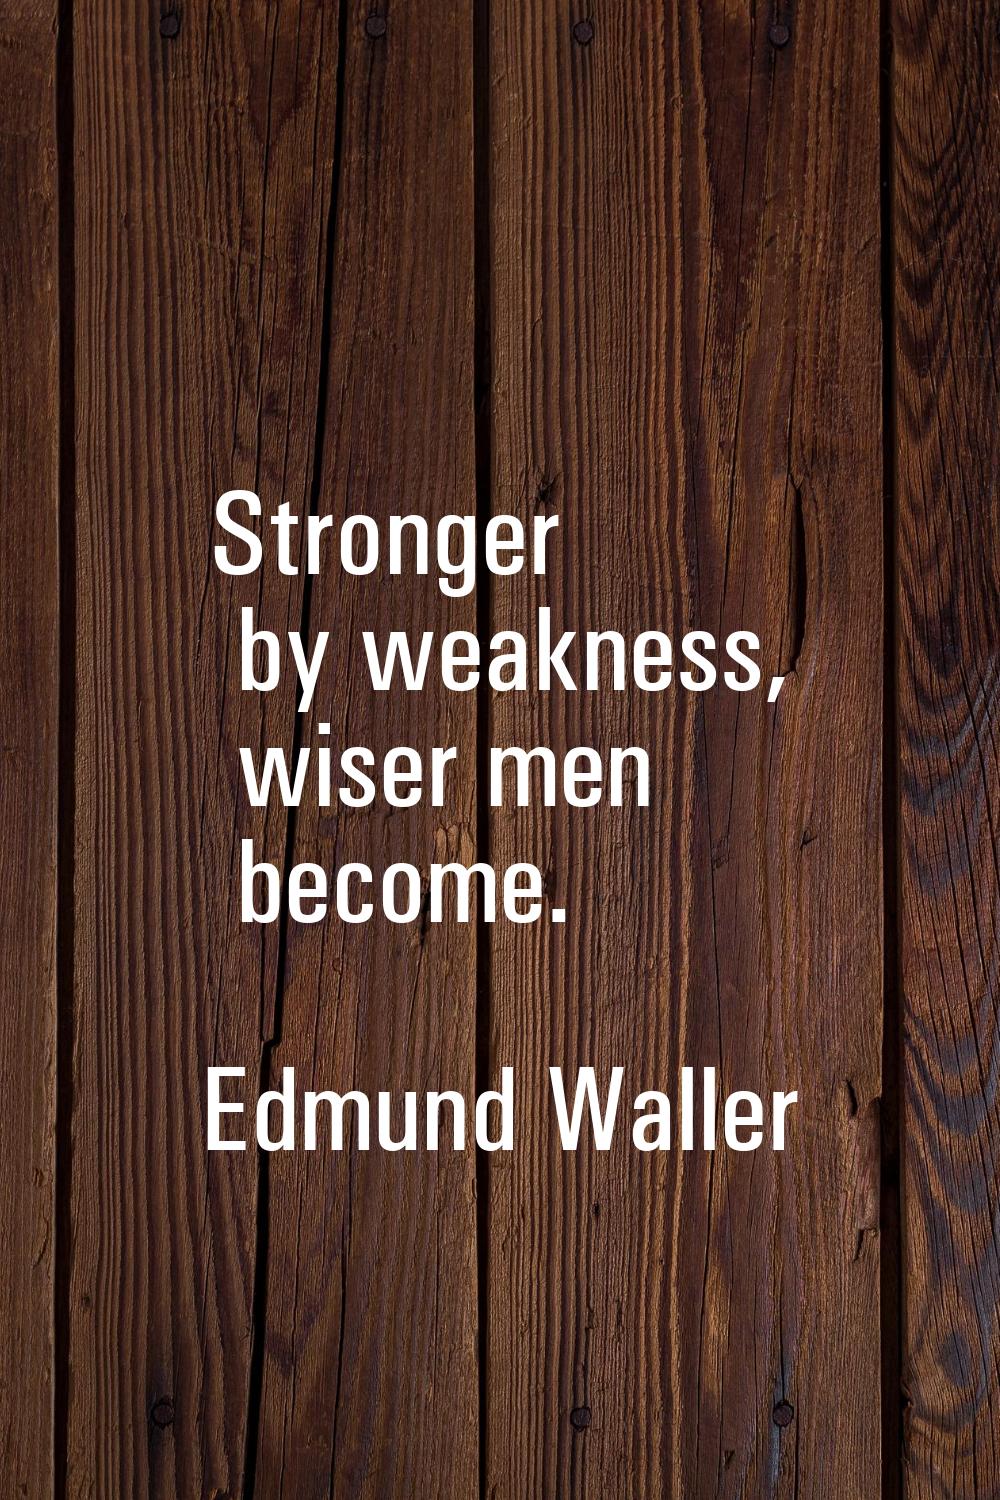 Stronger by weakness, wiser men become.